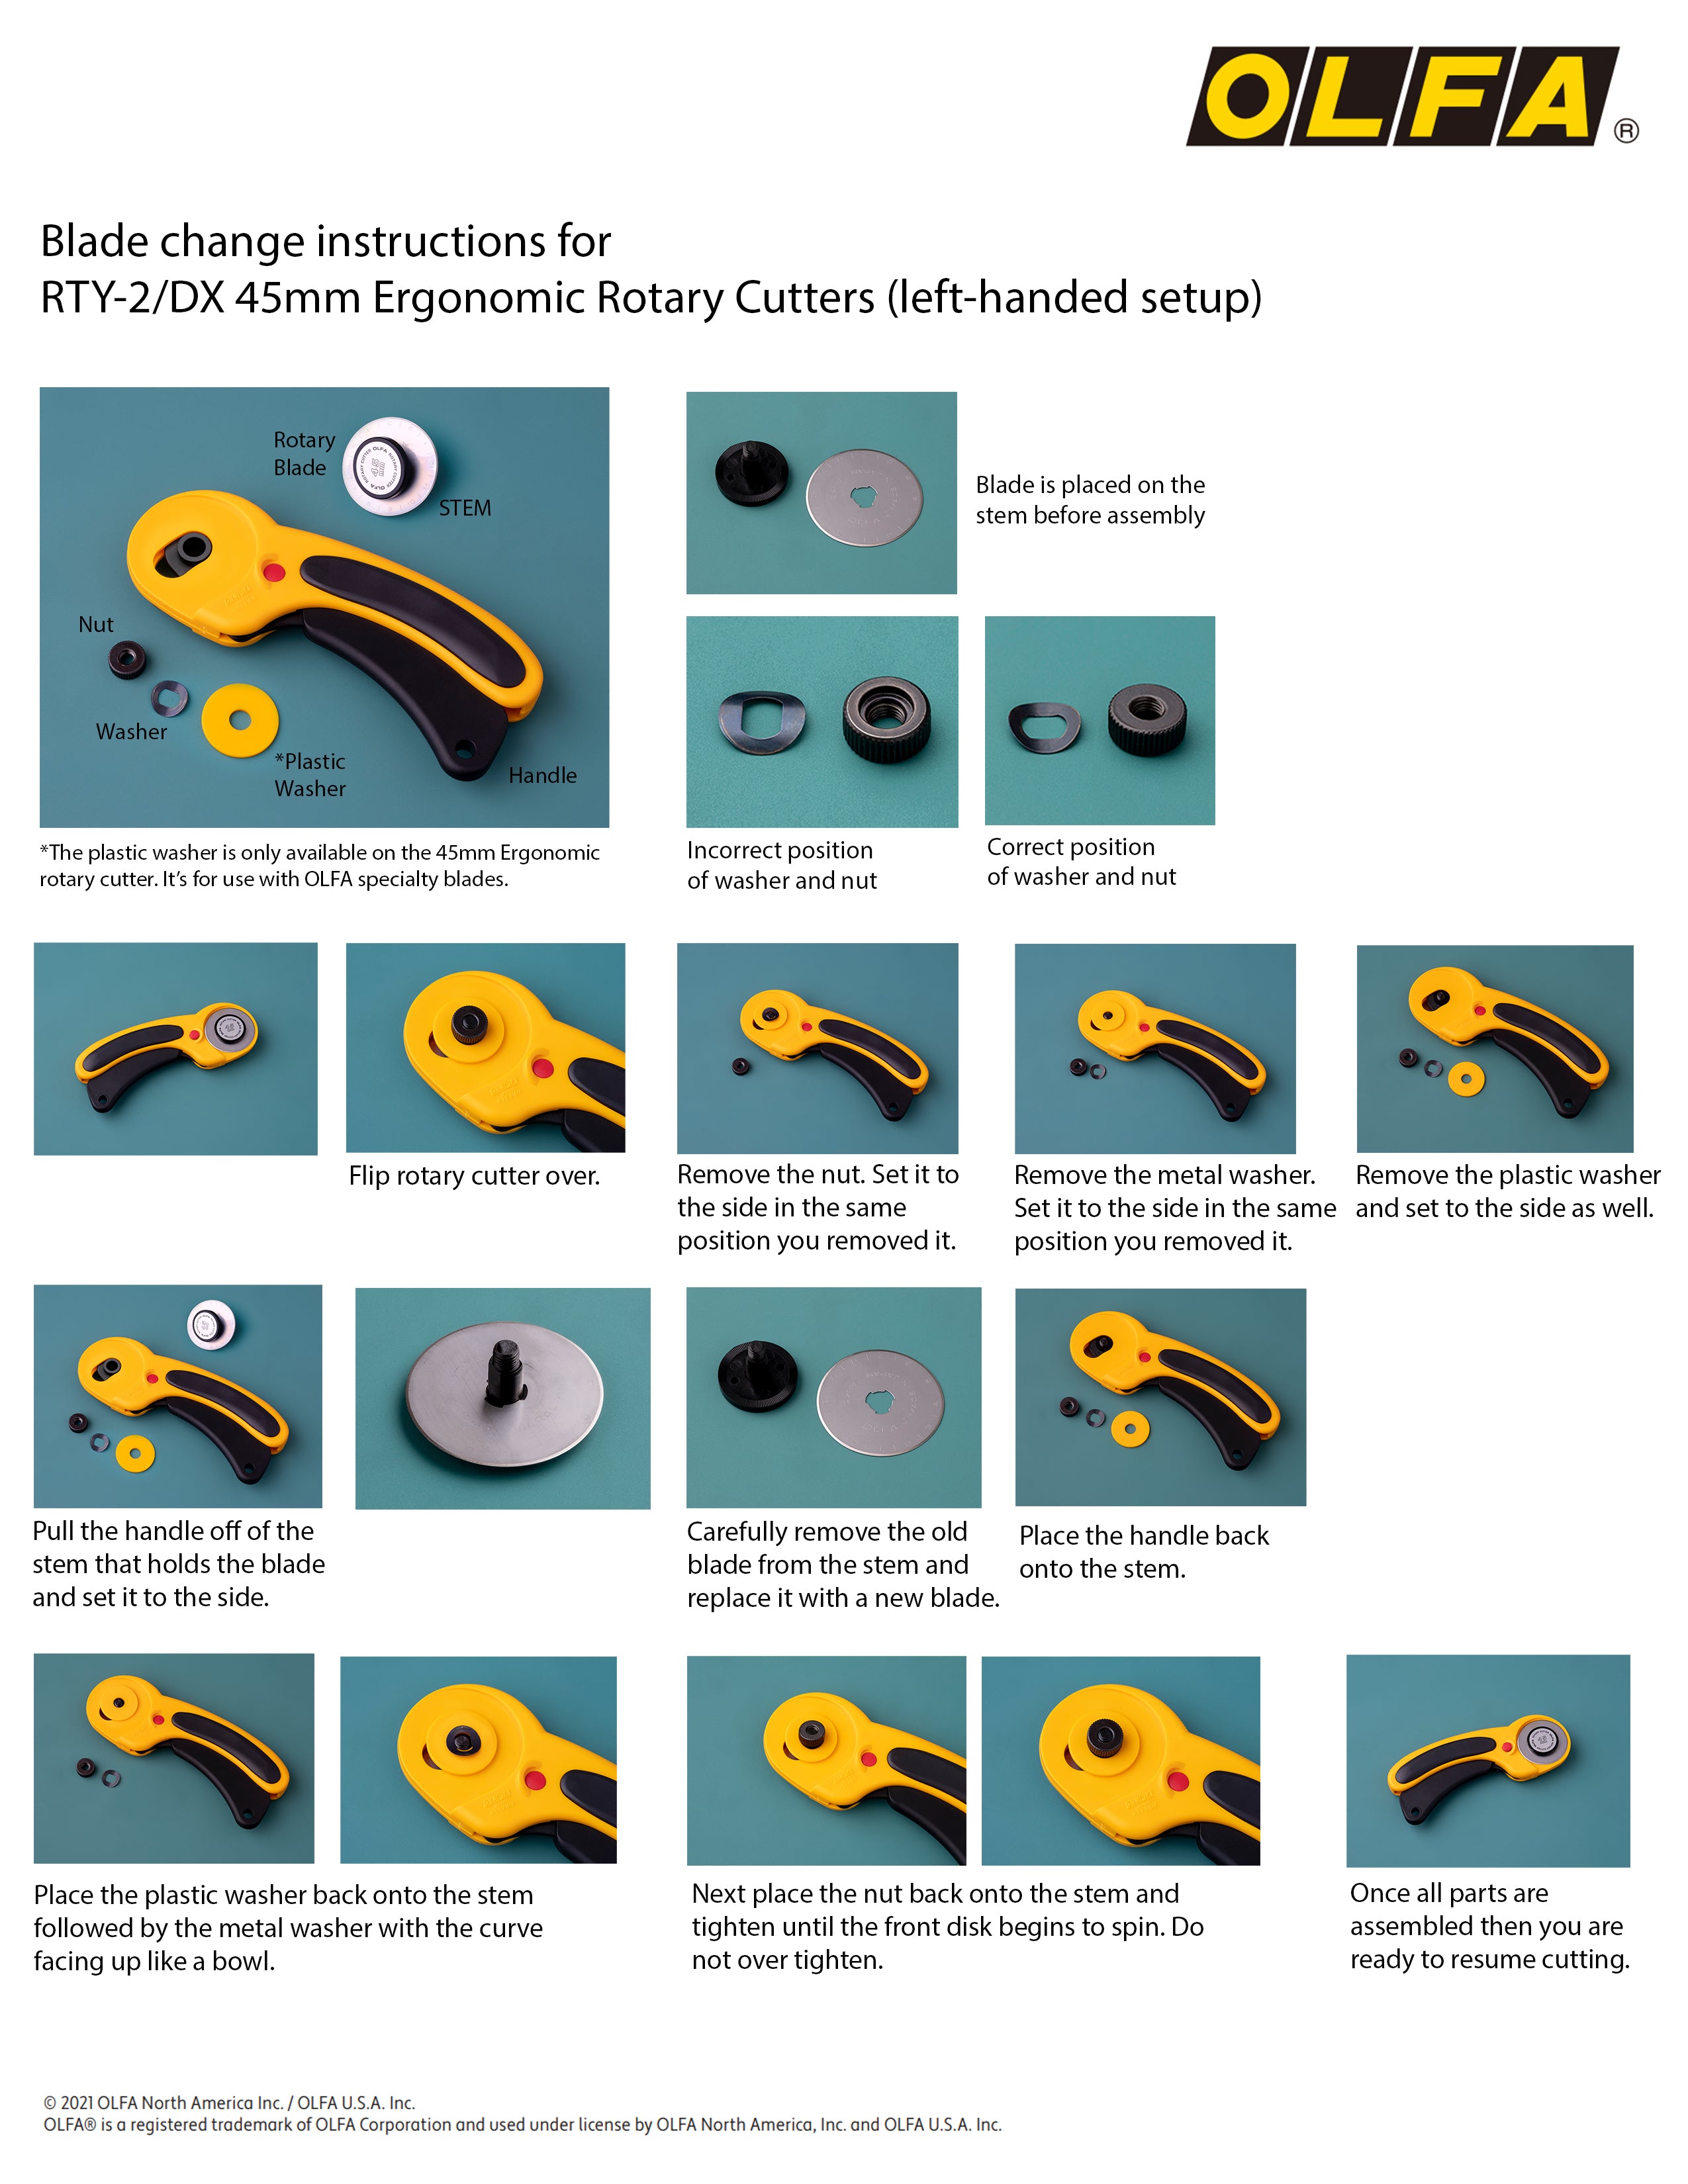 Changing the Blade on Your Rotary Cutter - EyeLoveKnots